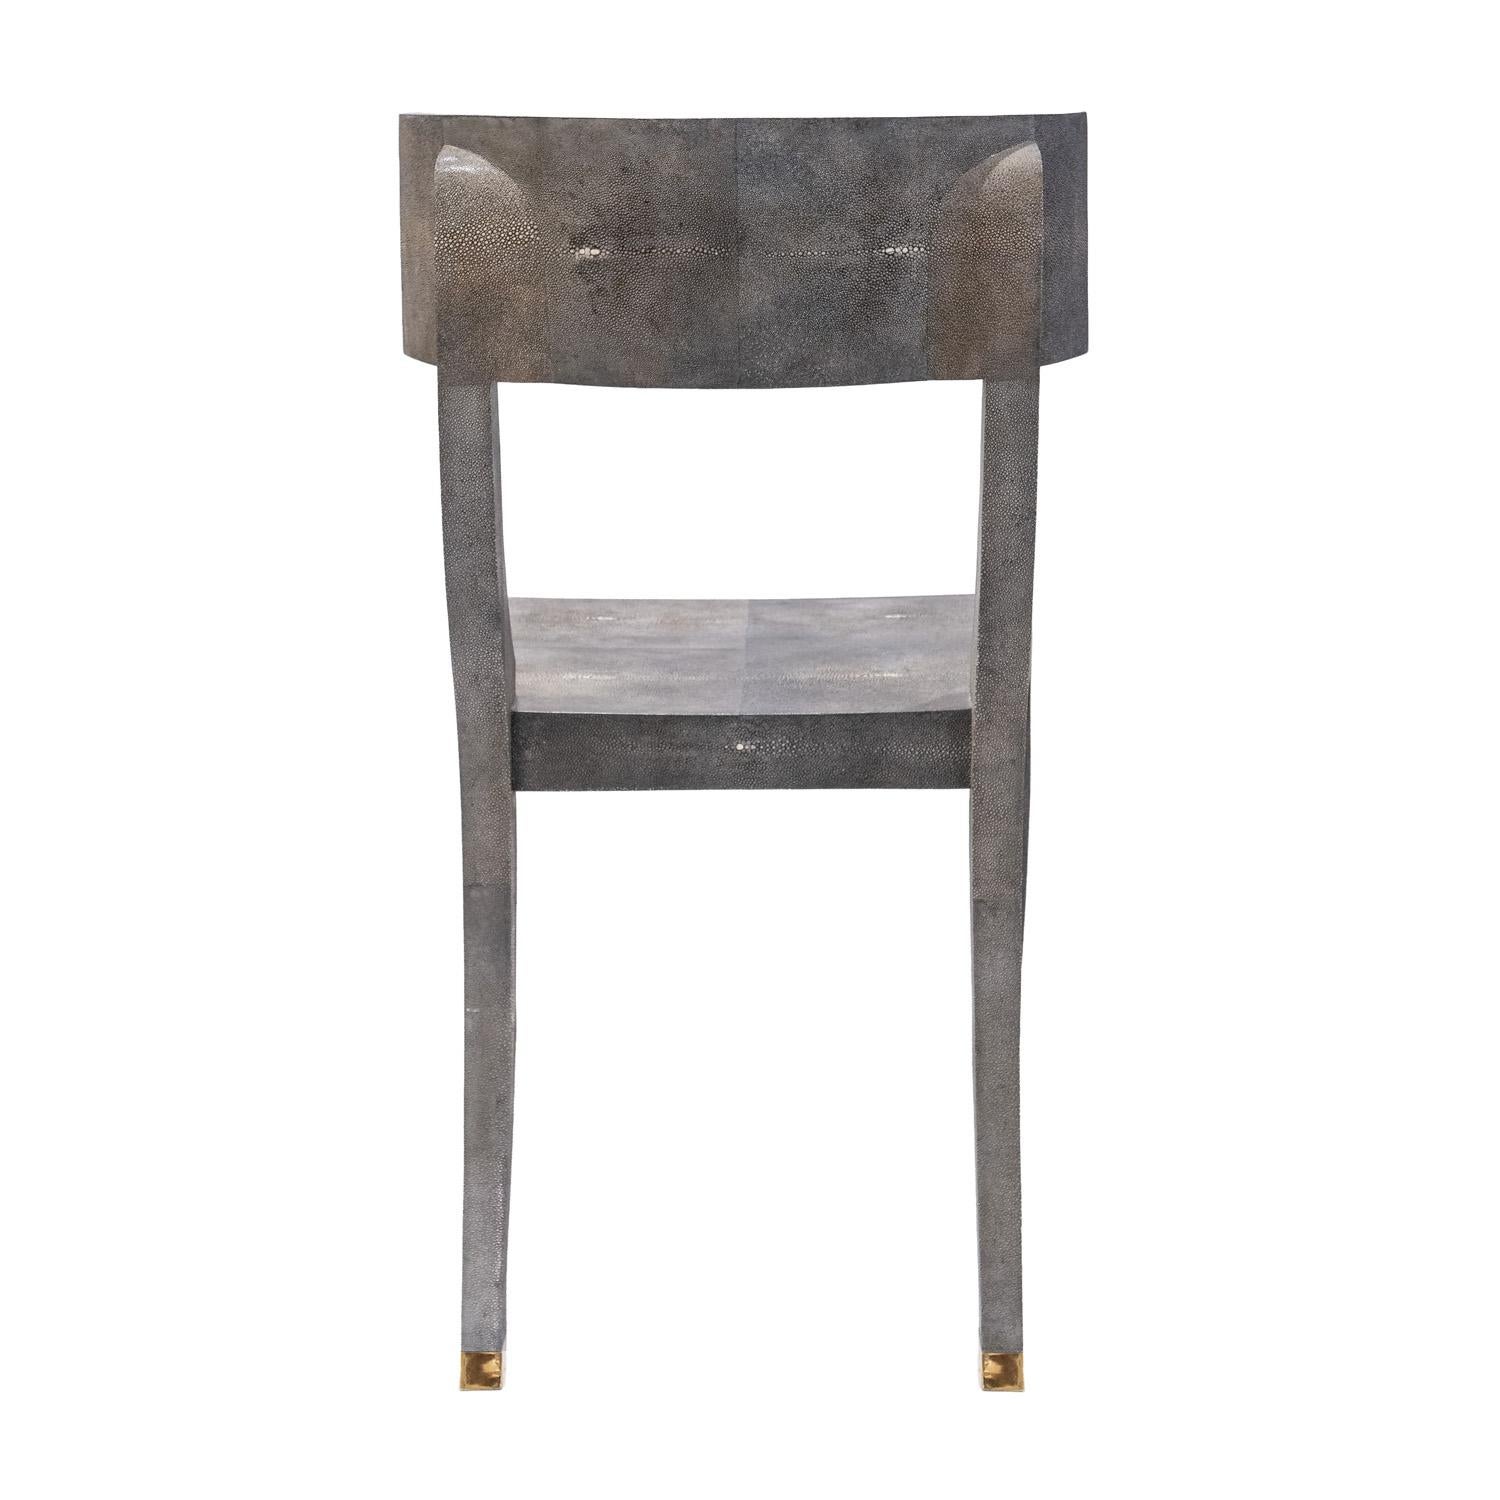 Hand-Crafted Exquisite Klismos Chair in Blue/Gray Shagreen with Brass Sabots 1980s For Sale